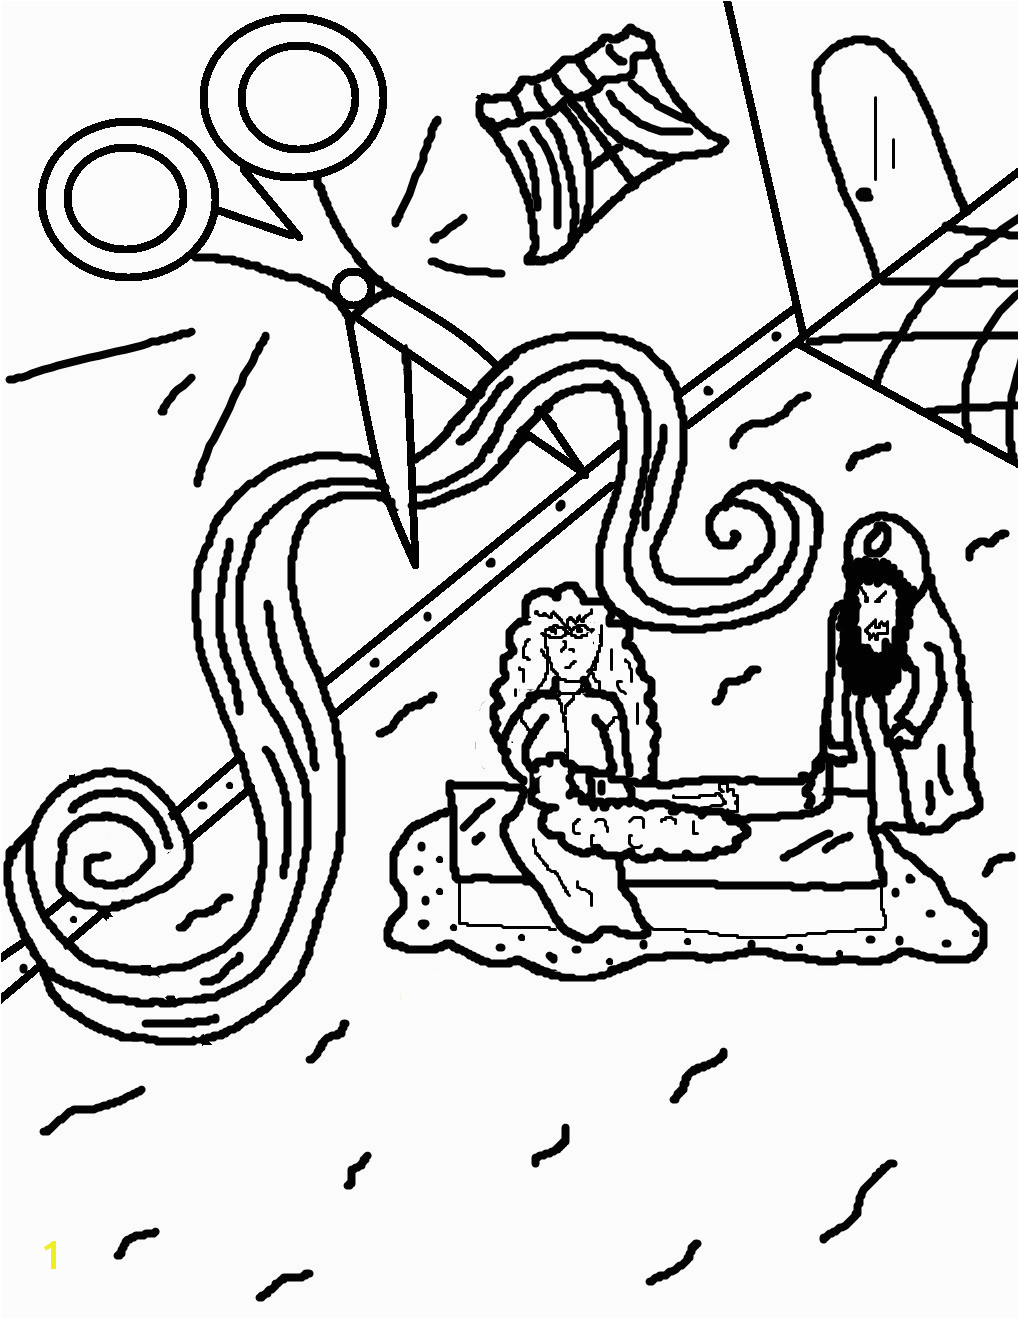 Samson and Delilah Coloring Page